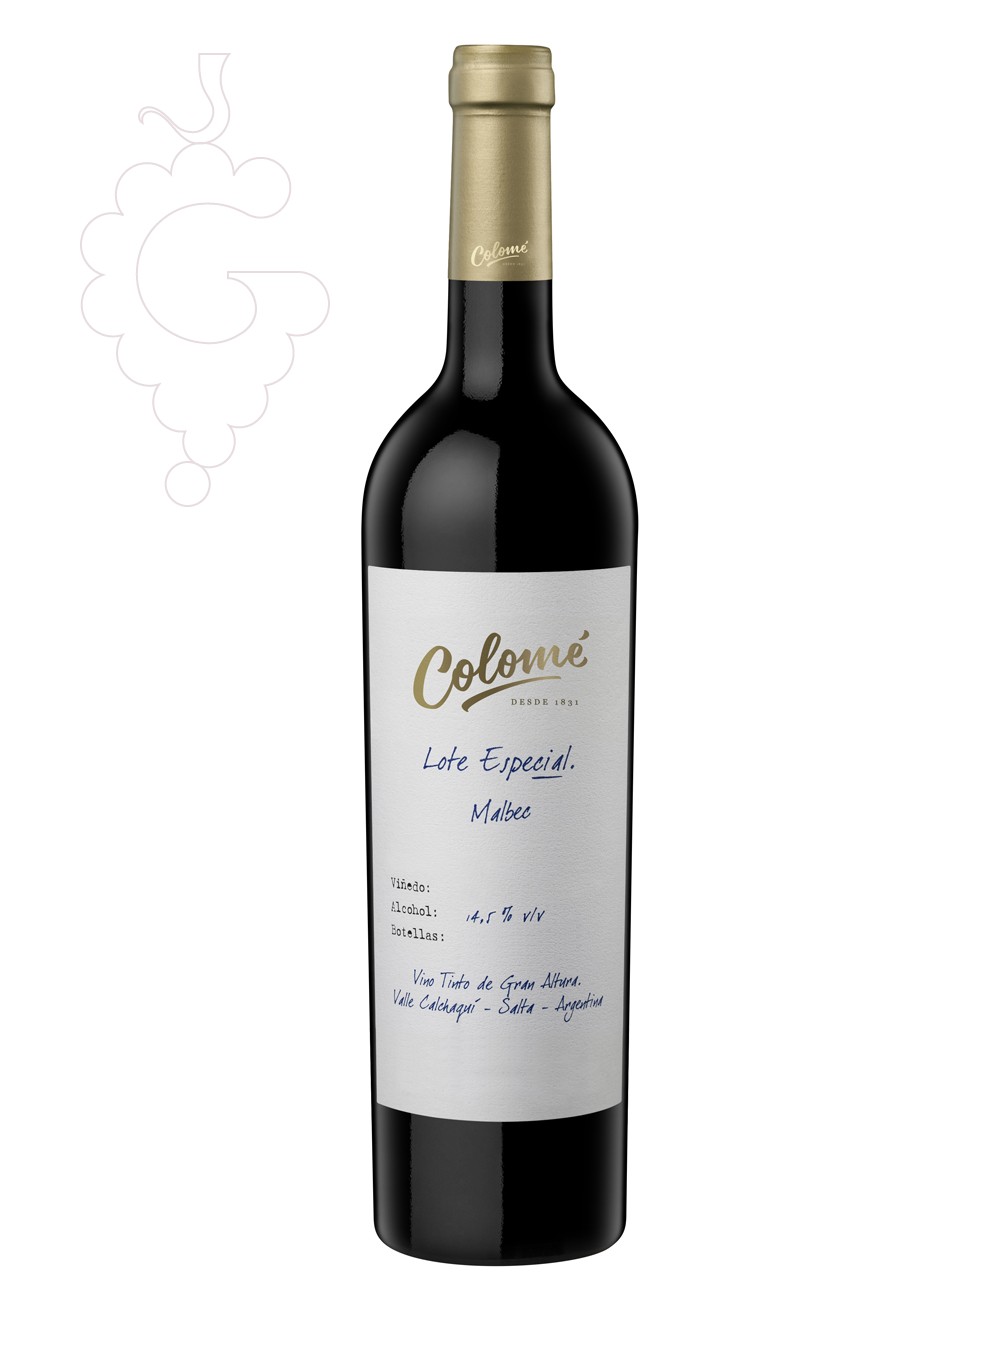 Photo Colomé Lote Especial Malbec red wine